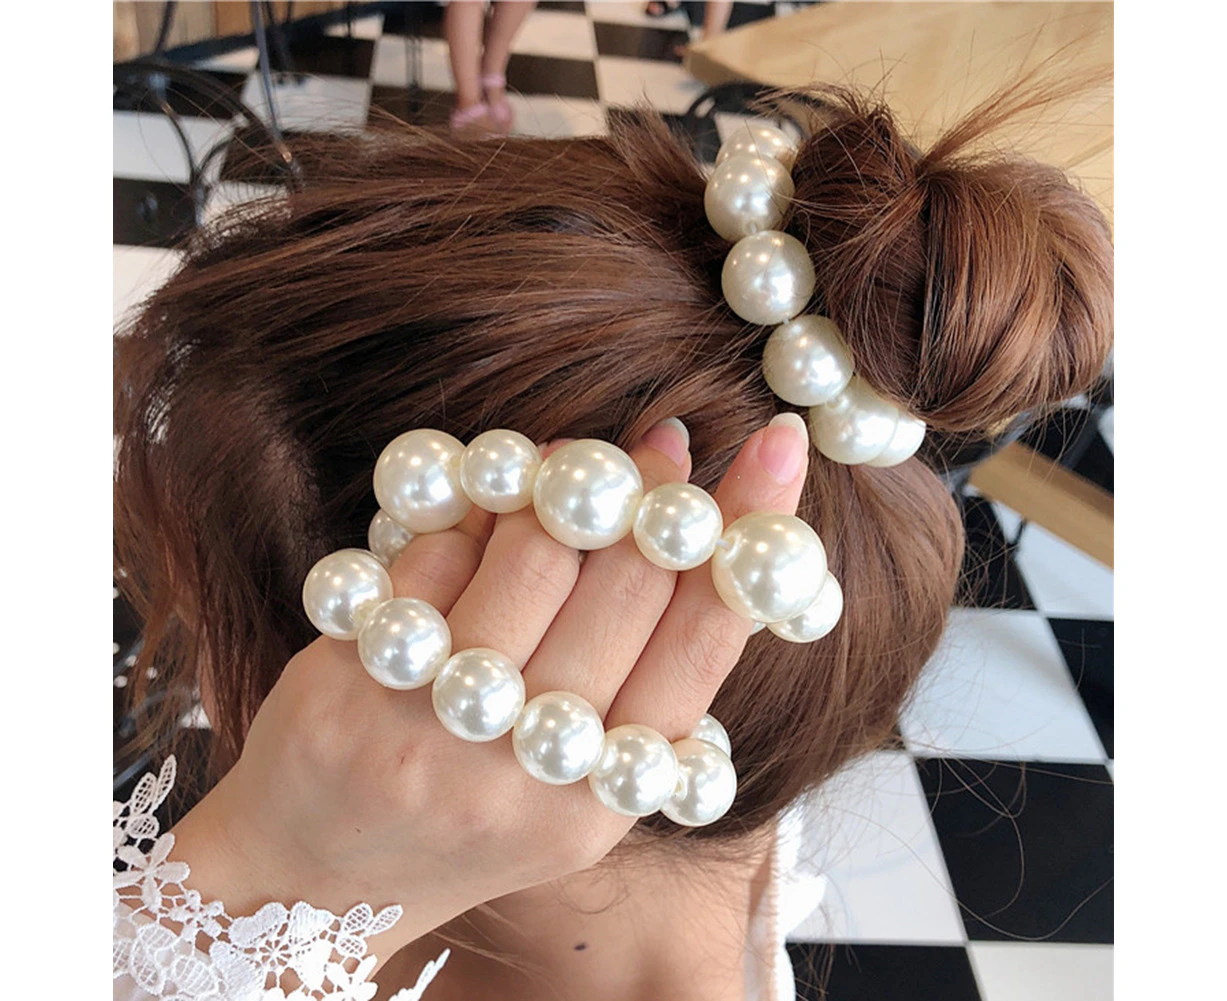 2Pcs Romantic Women Faux Pearl Beaded Ponytail Holder Hair Ring Rope  Accessory-Random Style .au